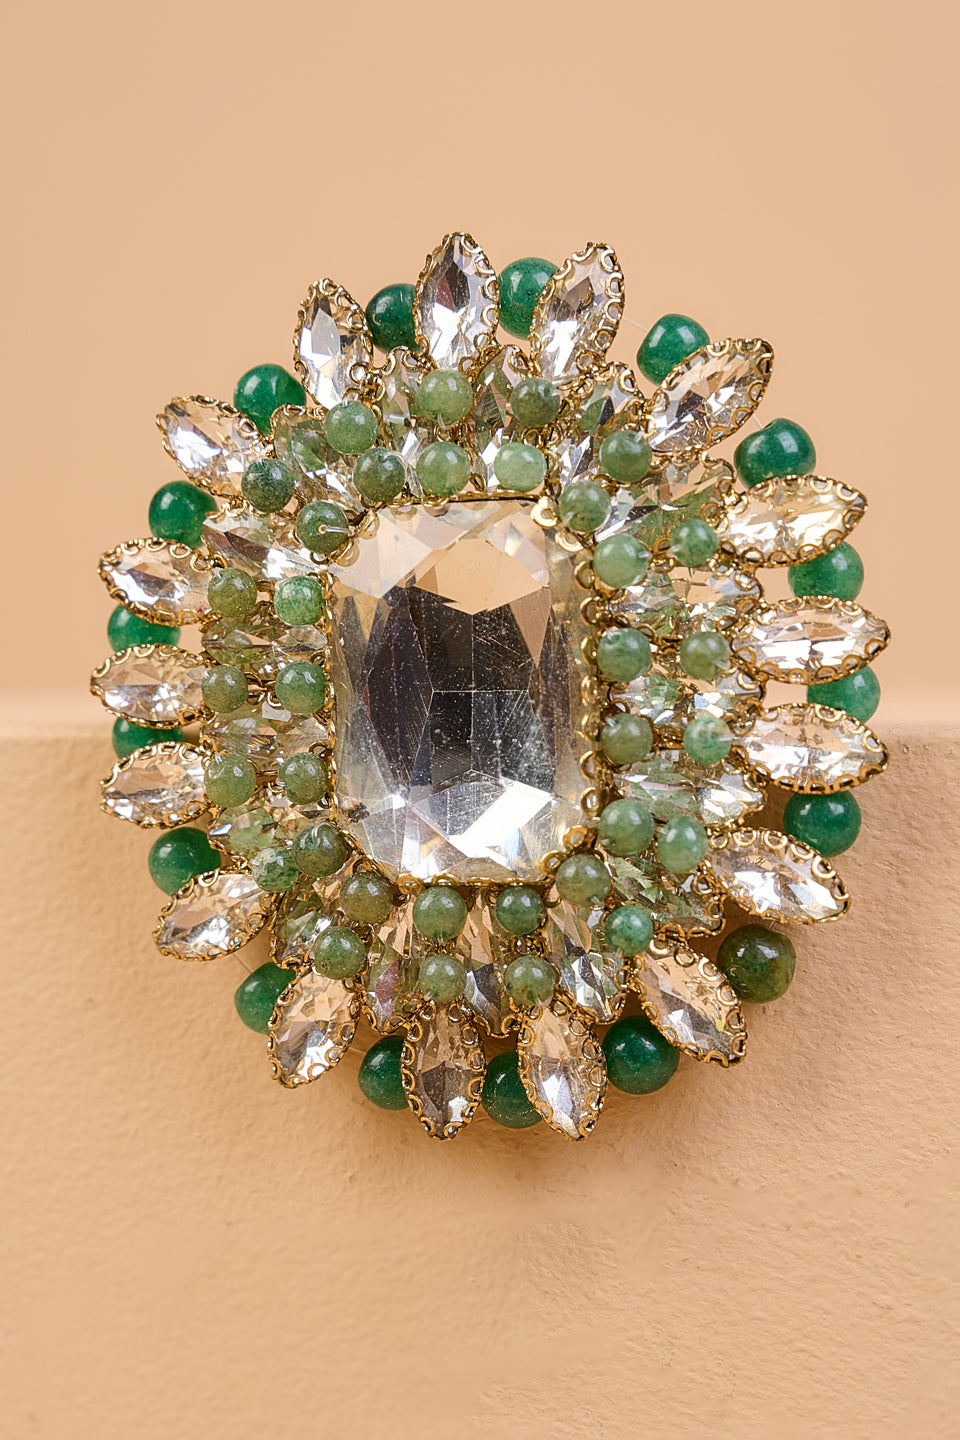 Centre Crystal Brooch with Pearl Detail